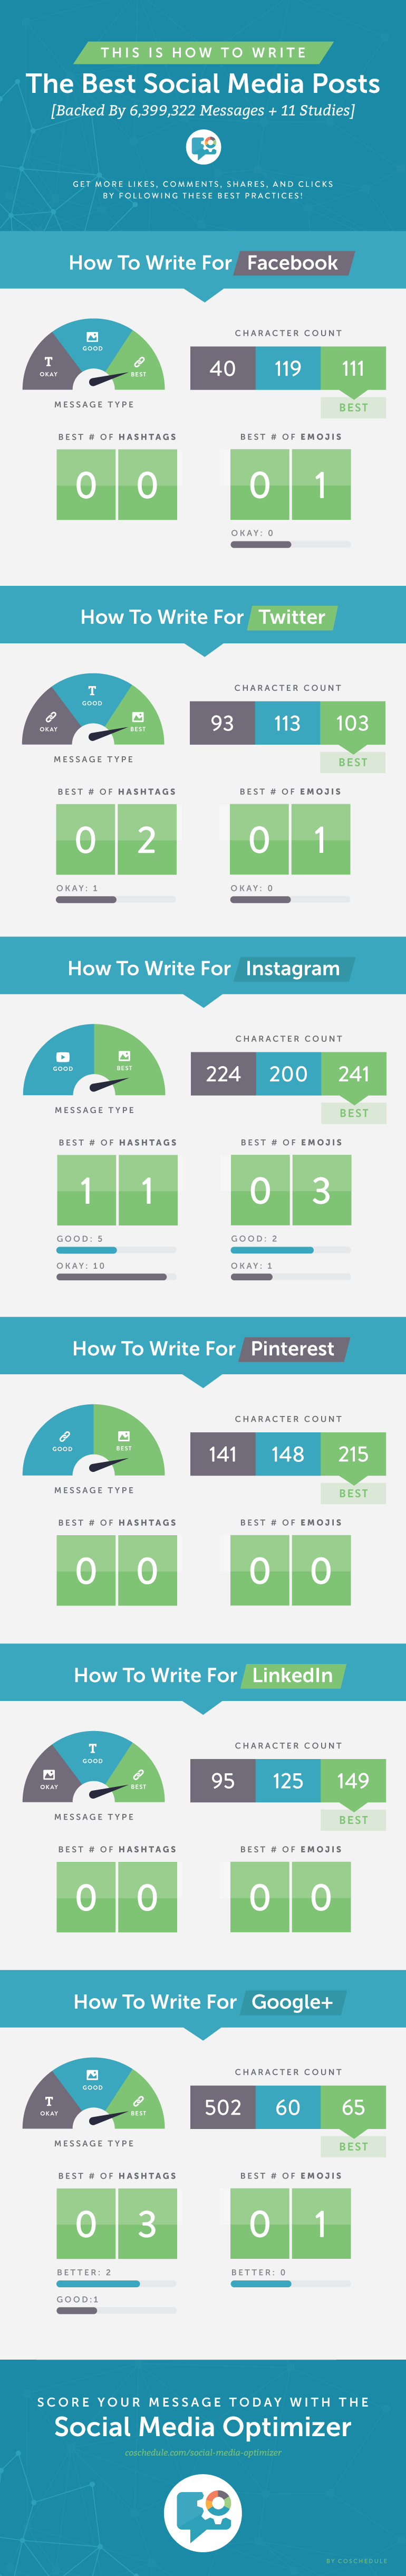 How To Write The Best Social Media Posts [Backed By 6,399,322 Messages + 11 Studies] - #infographic